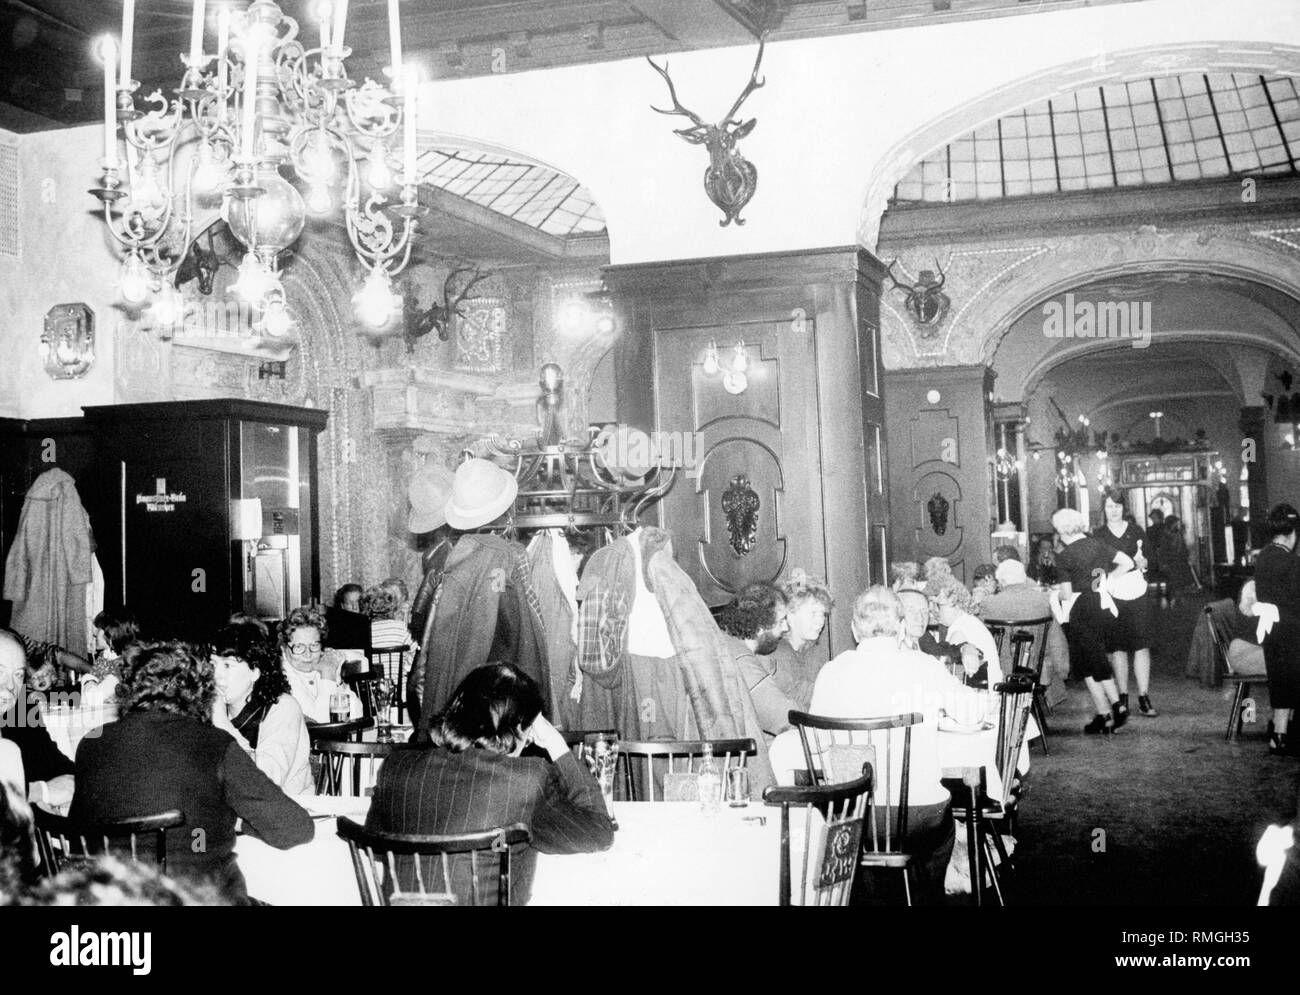 The 'Bierhalle' in the restaurant 'Zum Augustiner' in the Neuhauserstrasse in Munich. In the background the 'Muschenlsaal' with glass dome. The picture shows the restaurant after the renovation. The wooden ceilings, the glass dome and the vault were preserved. Stock Photo